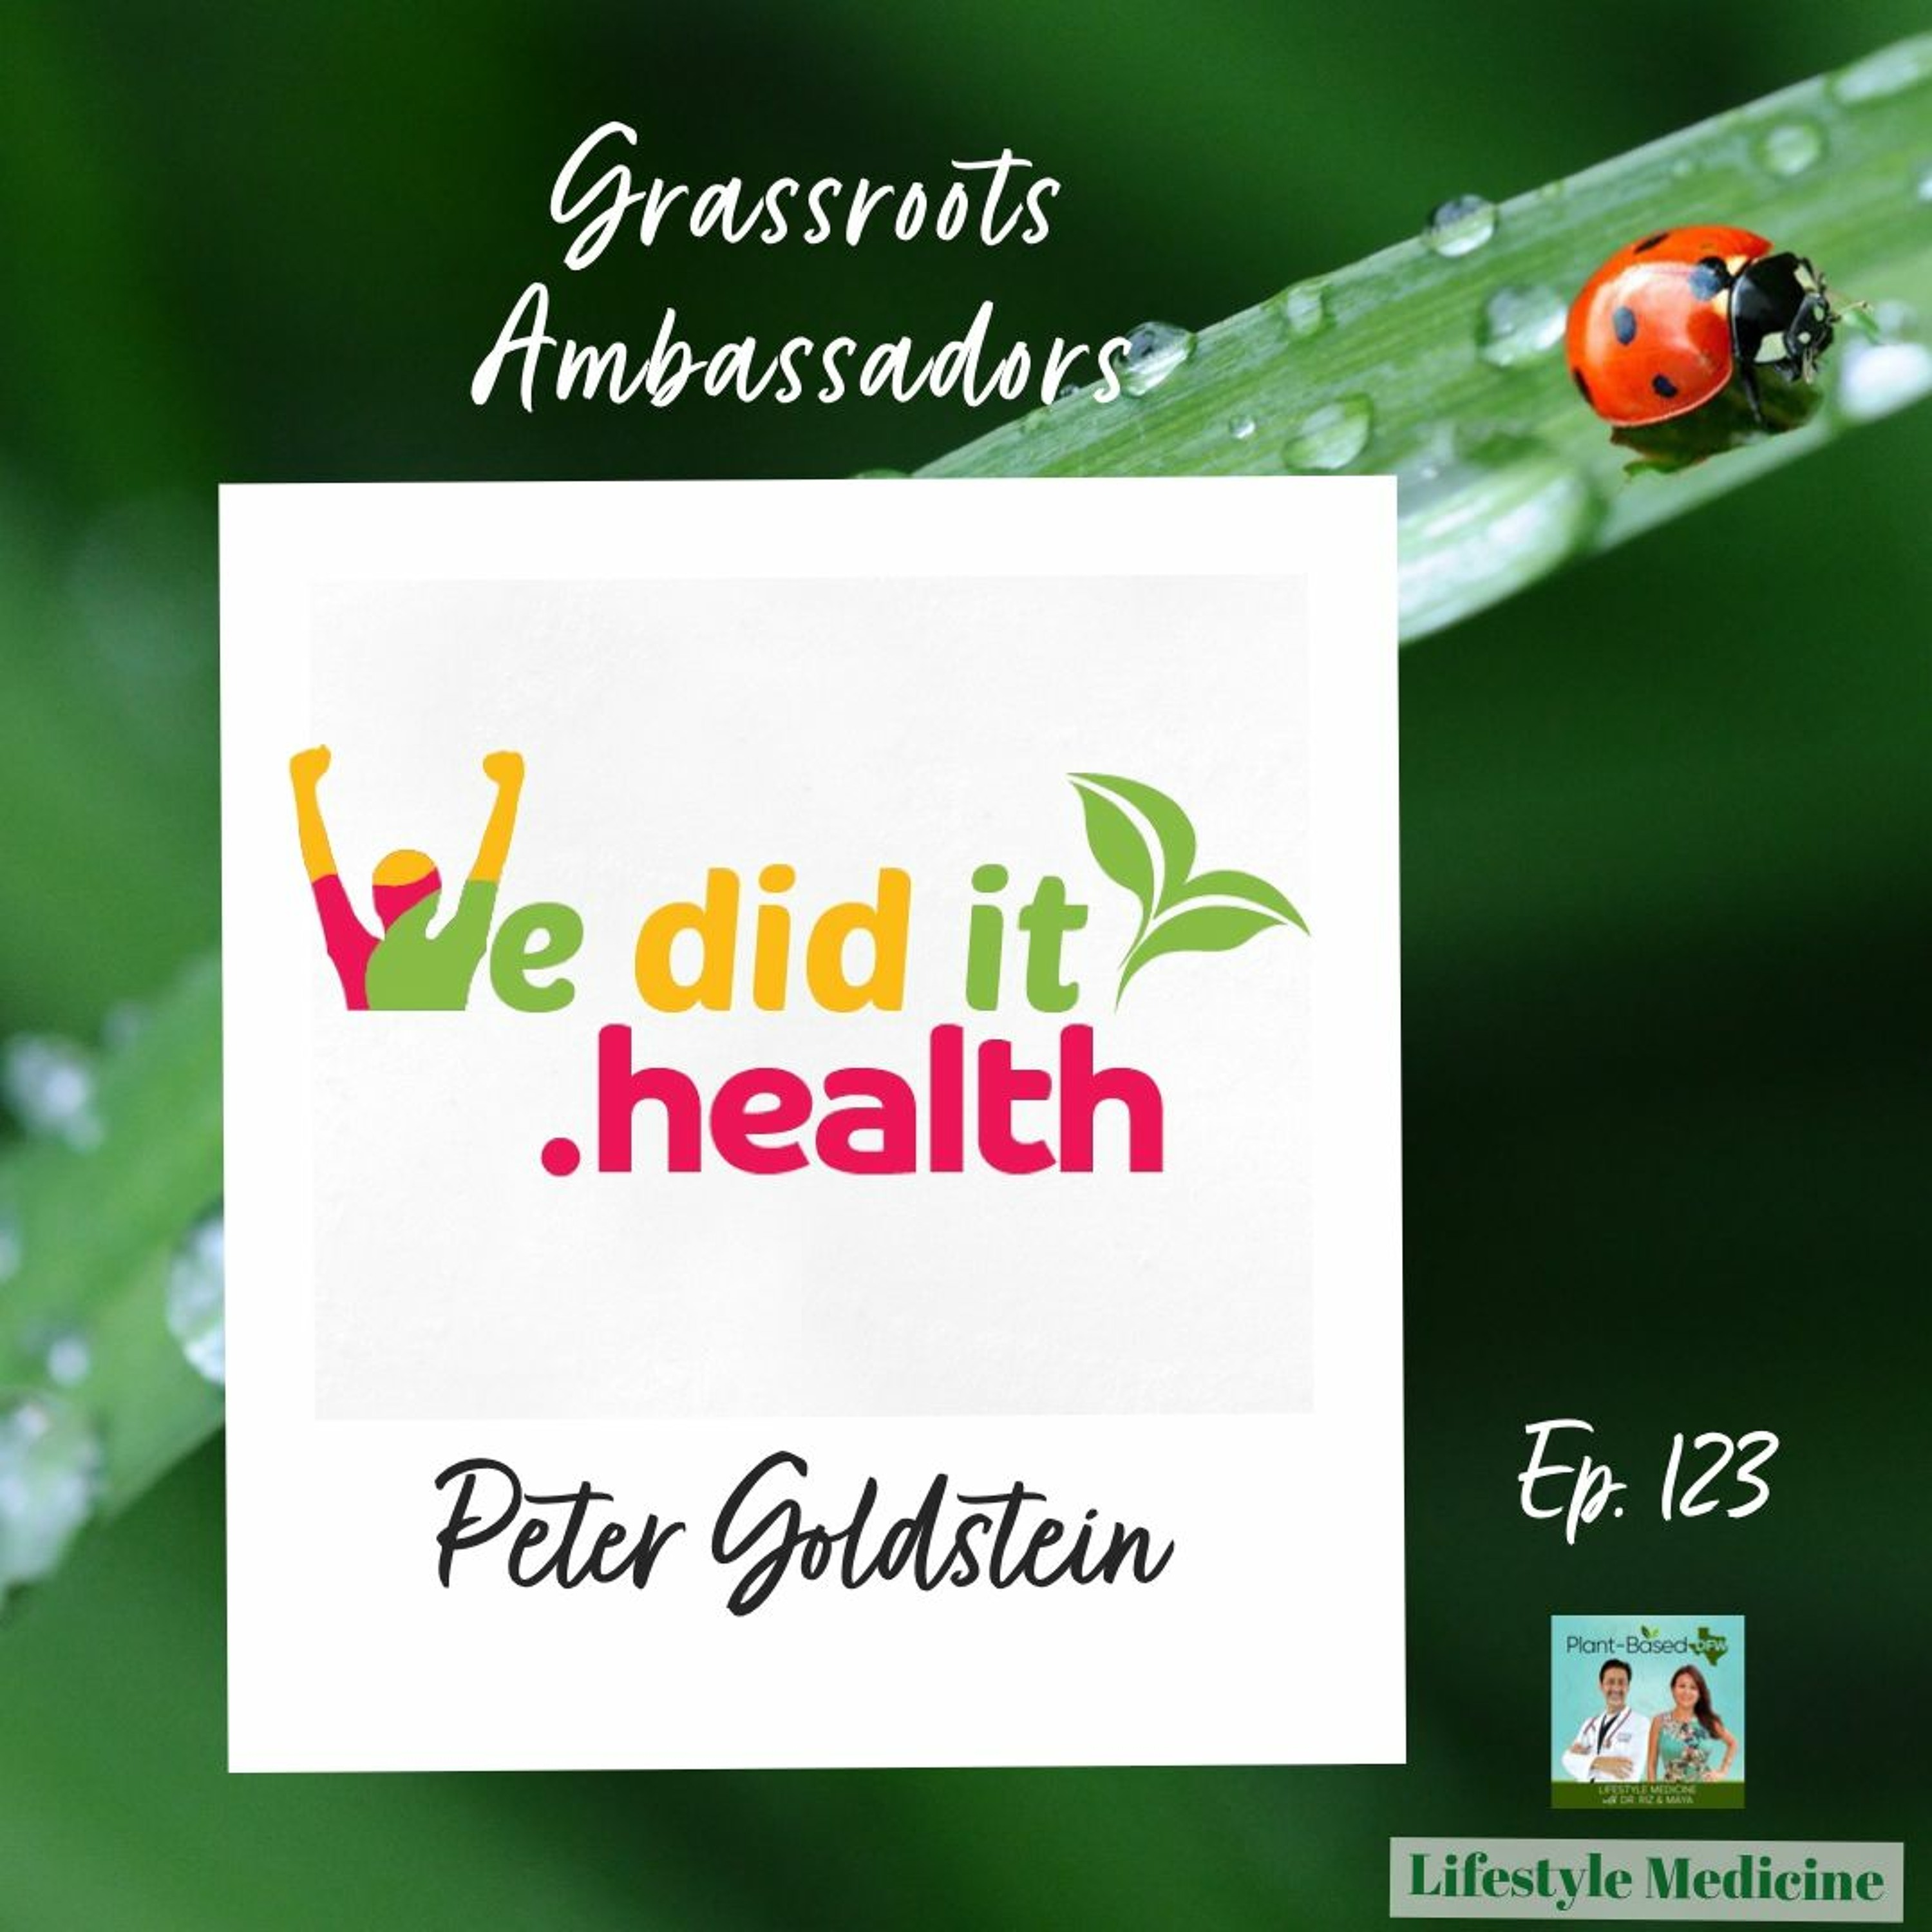 123: Chime In Grassroots Ambassadors, We Did It Health Image